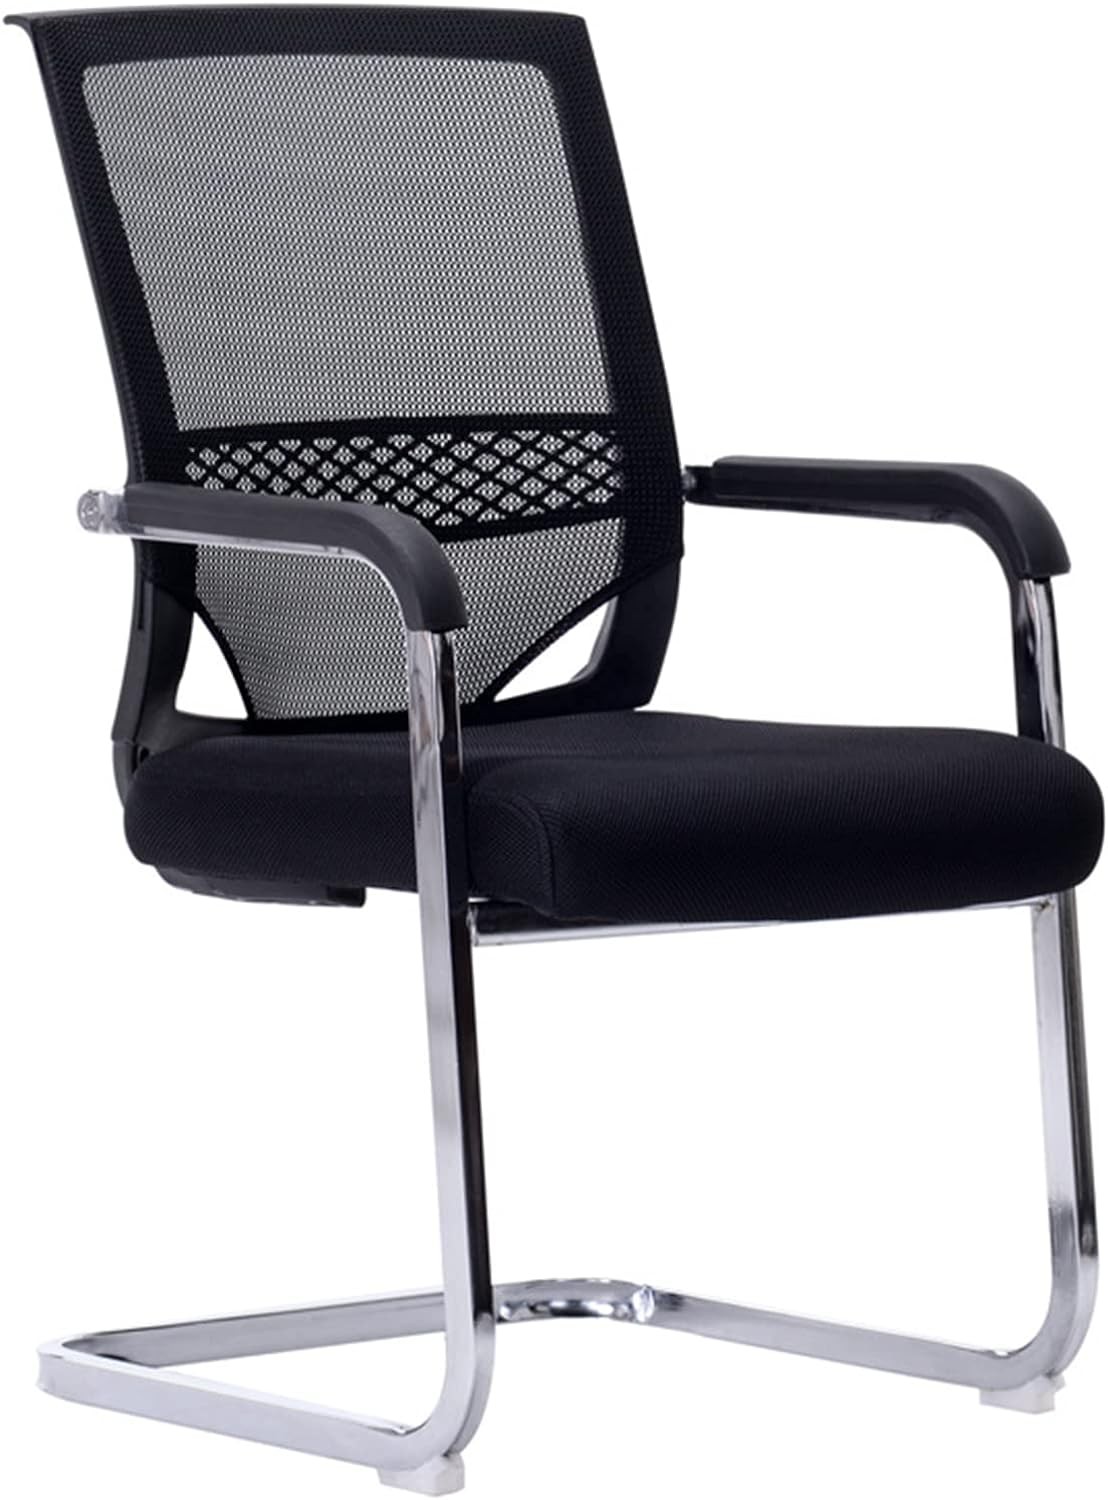 SIT Executive Visitor Chair Black